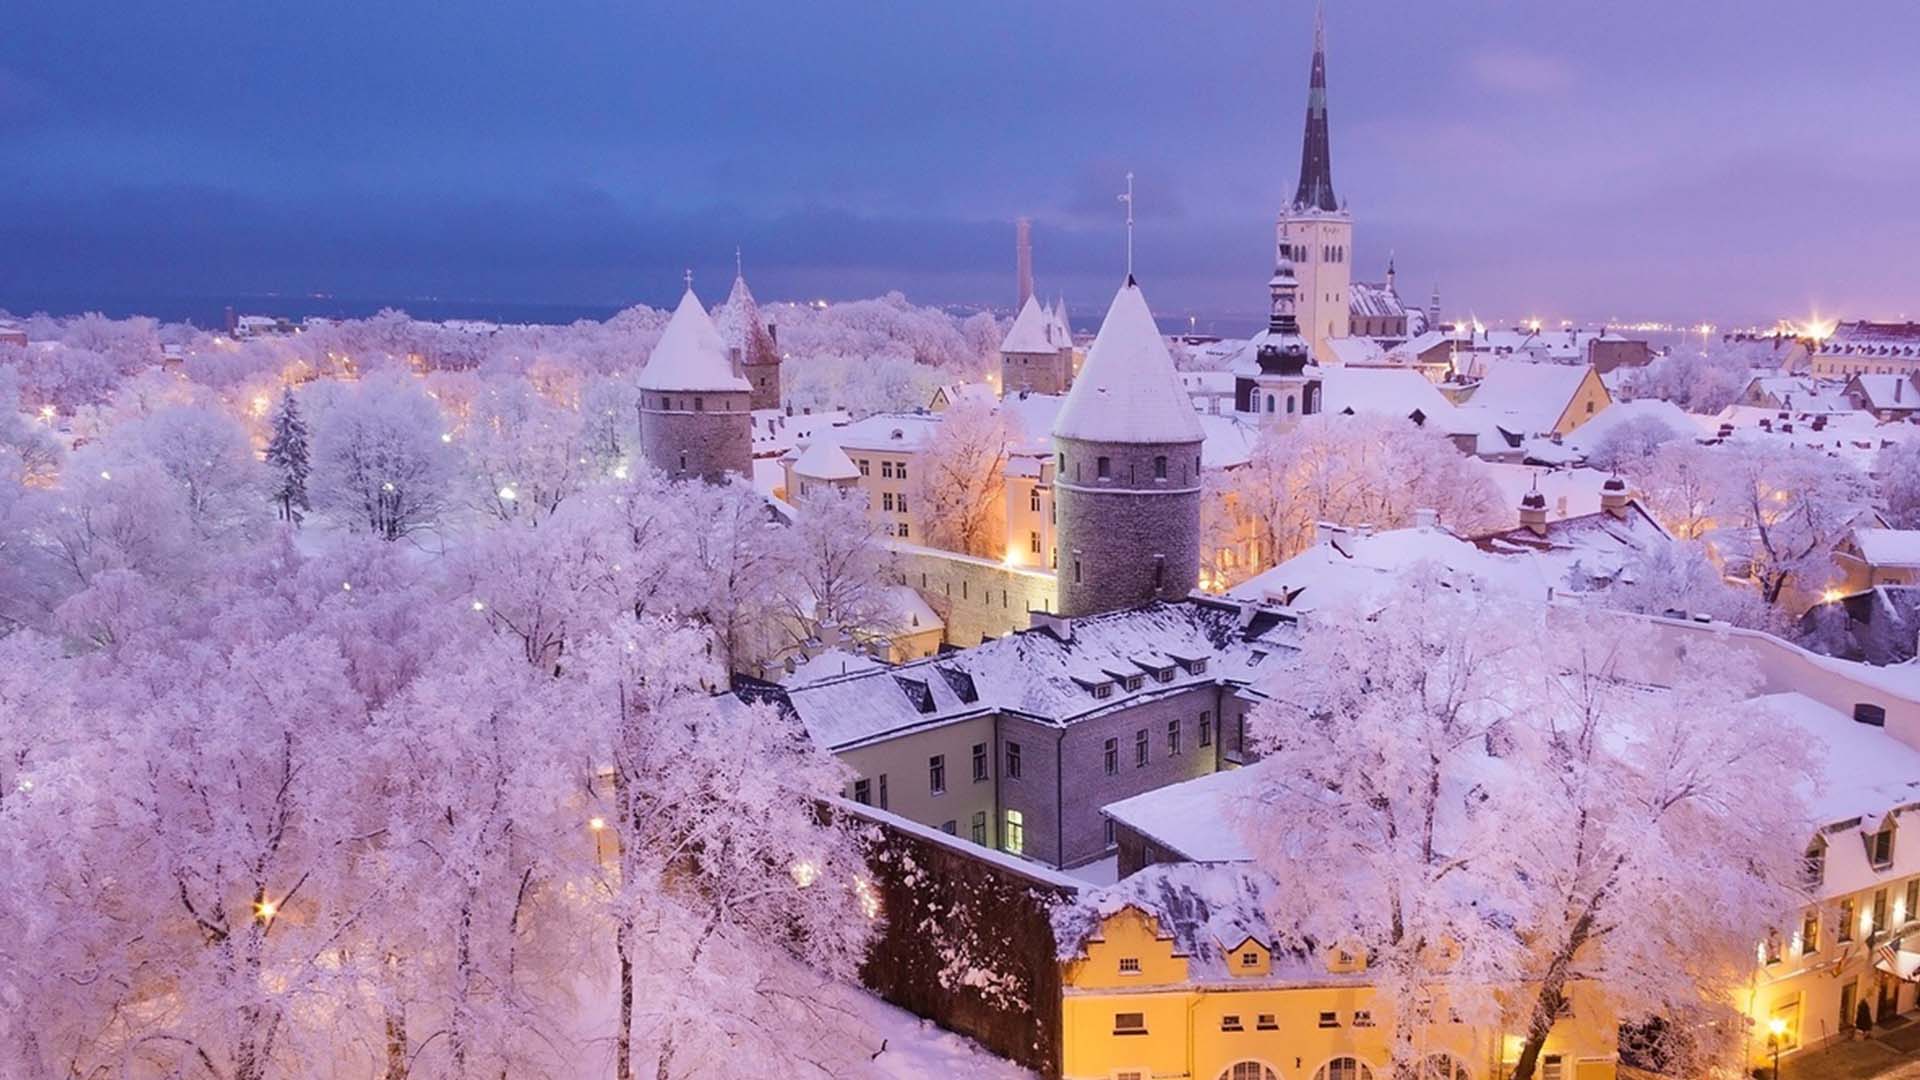 Plan a perfect winter holiday in Estonia airBaltic blog